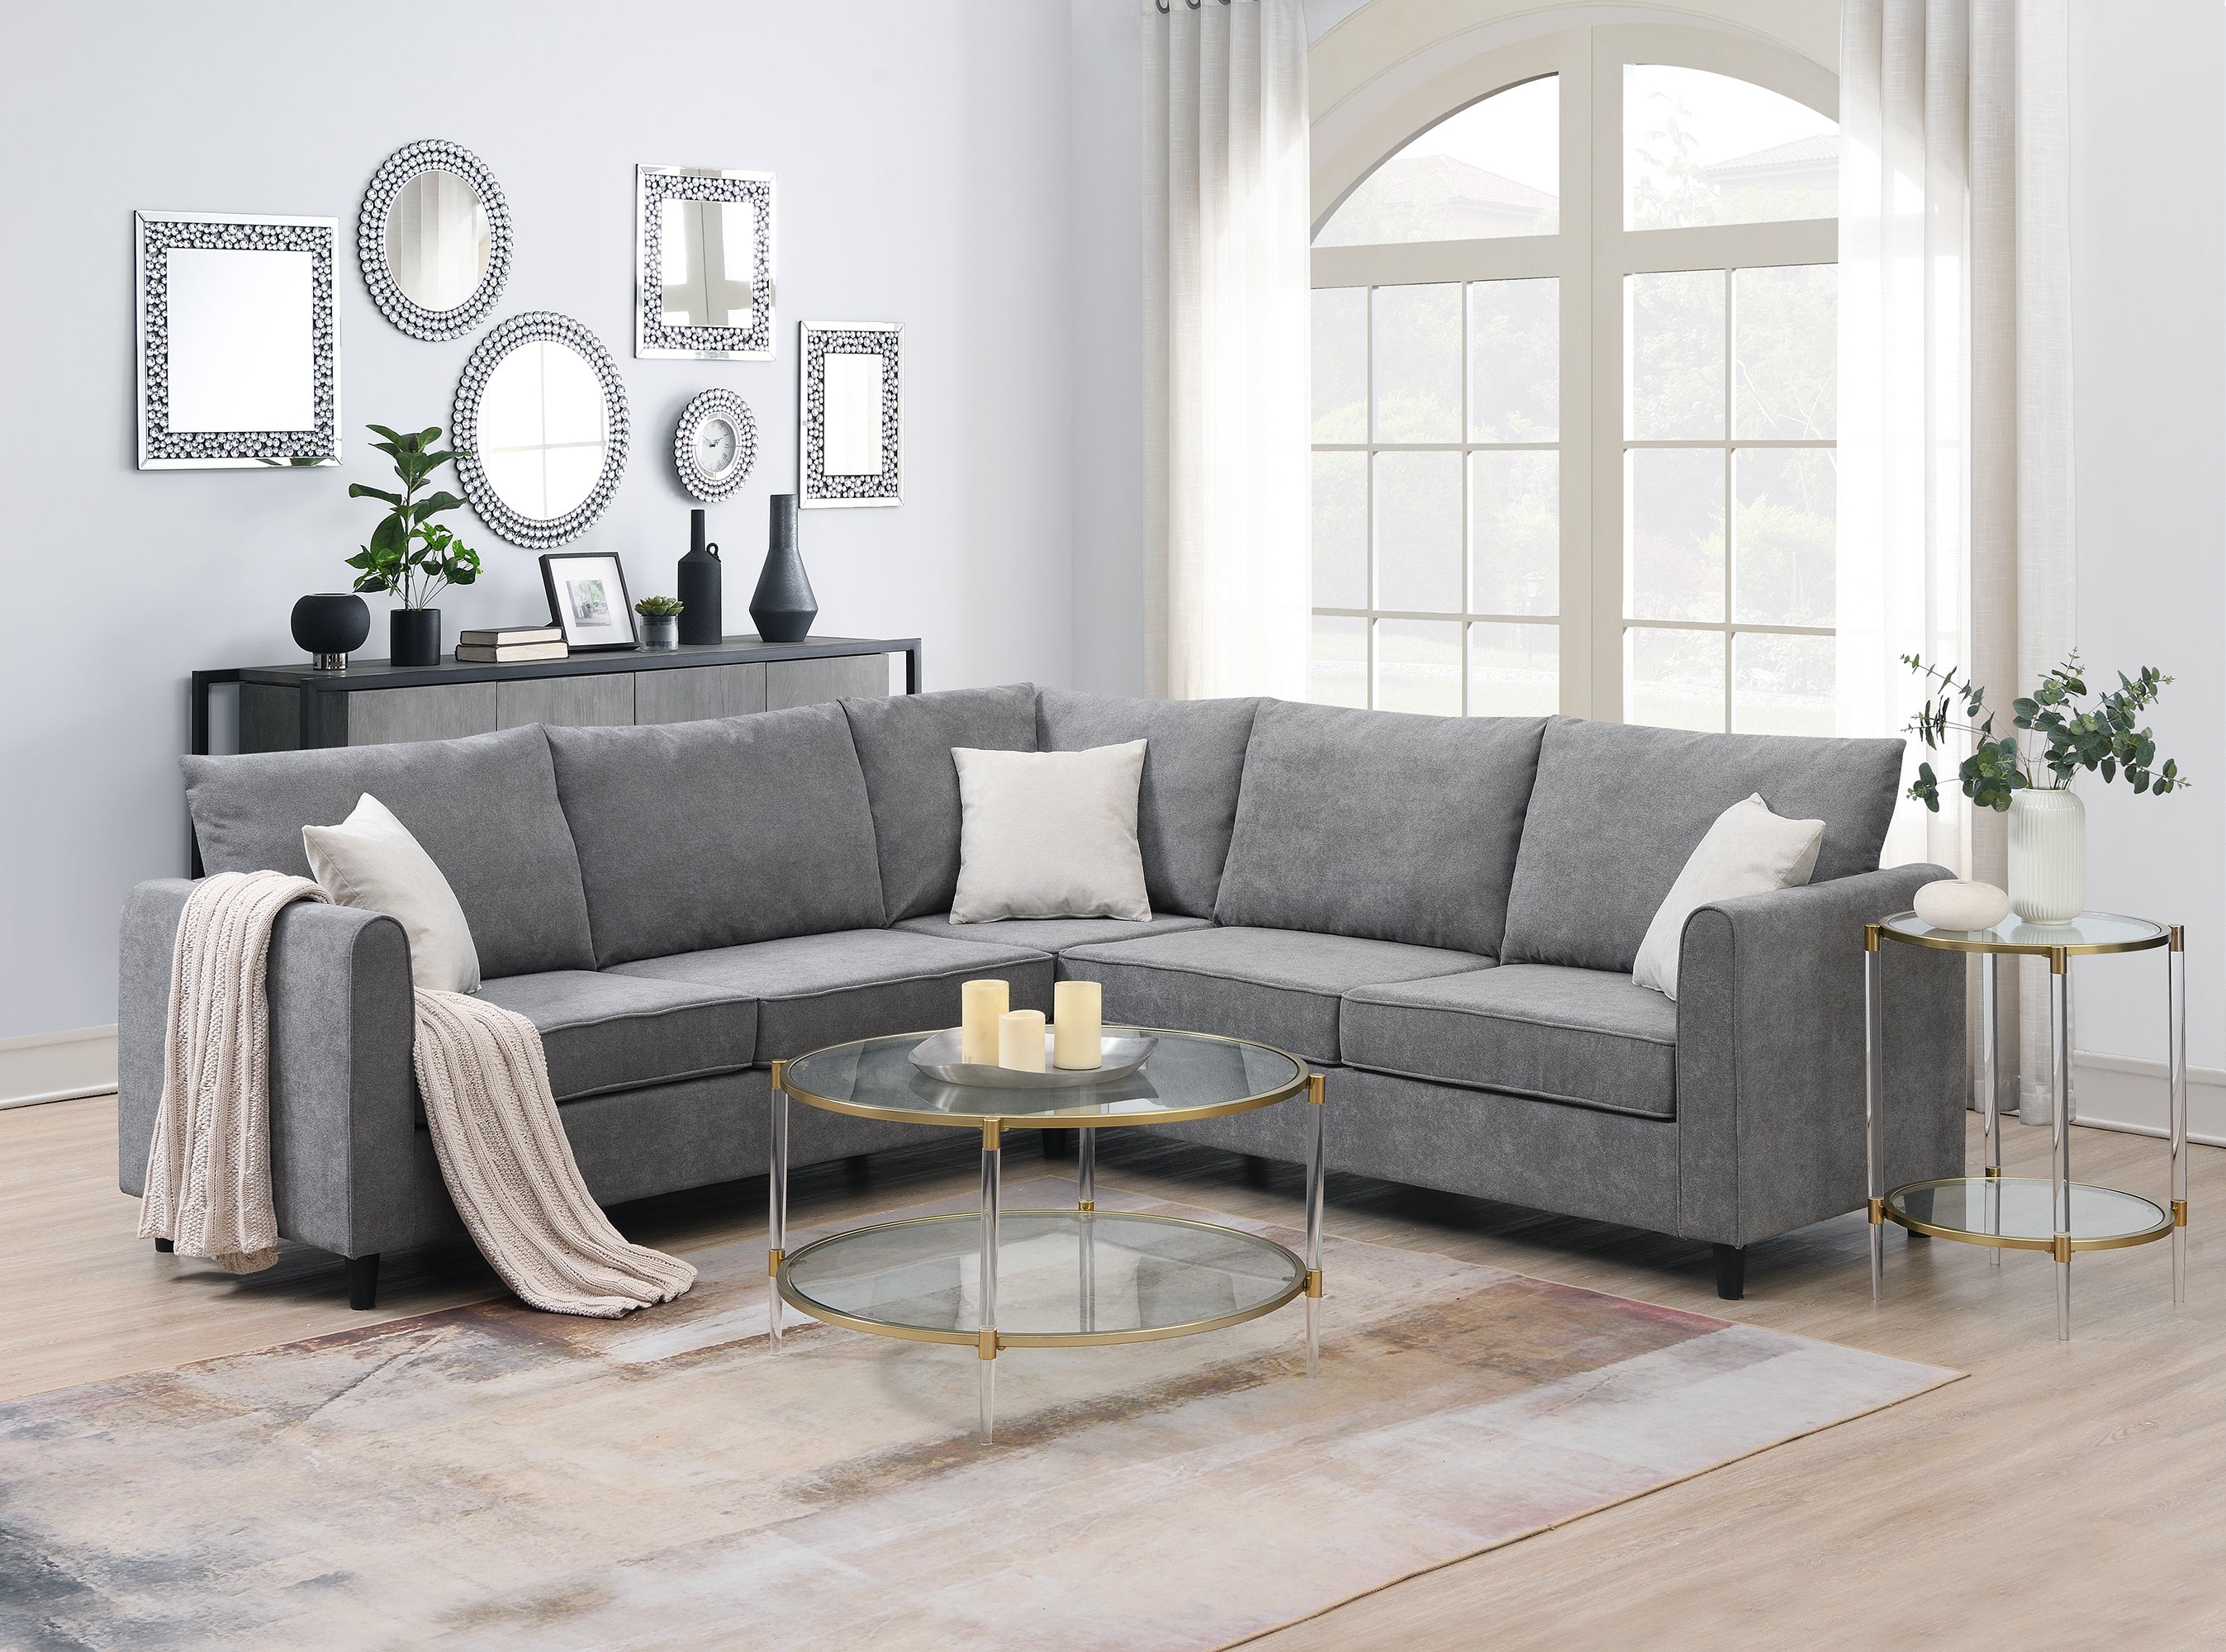 Modern Upholstered Living Room Sectional Sofa / L Shape Furniture Couch